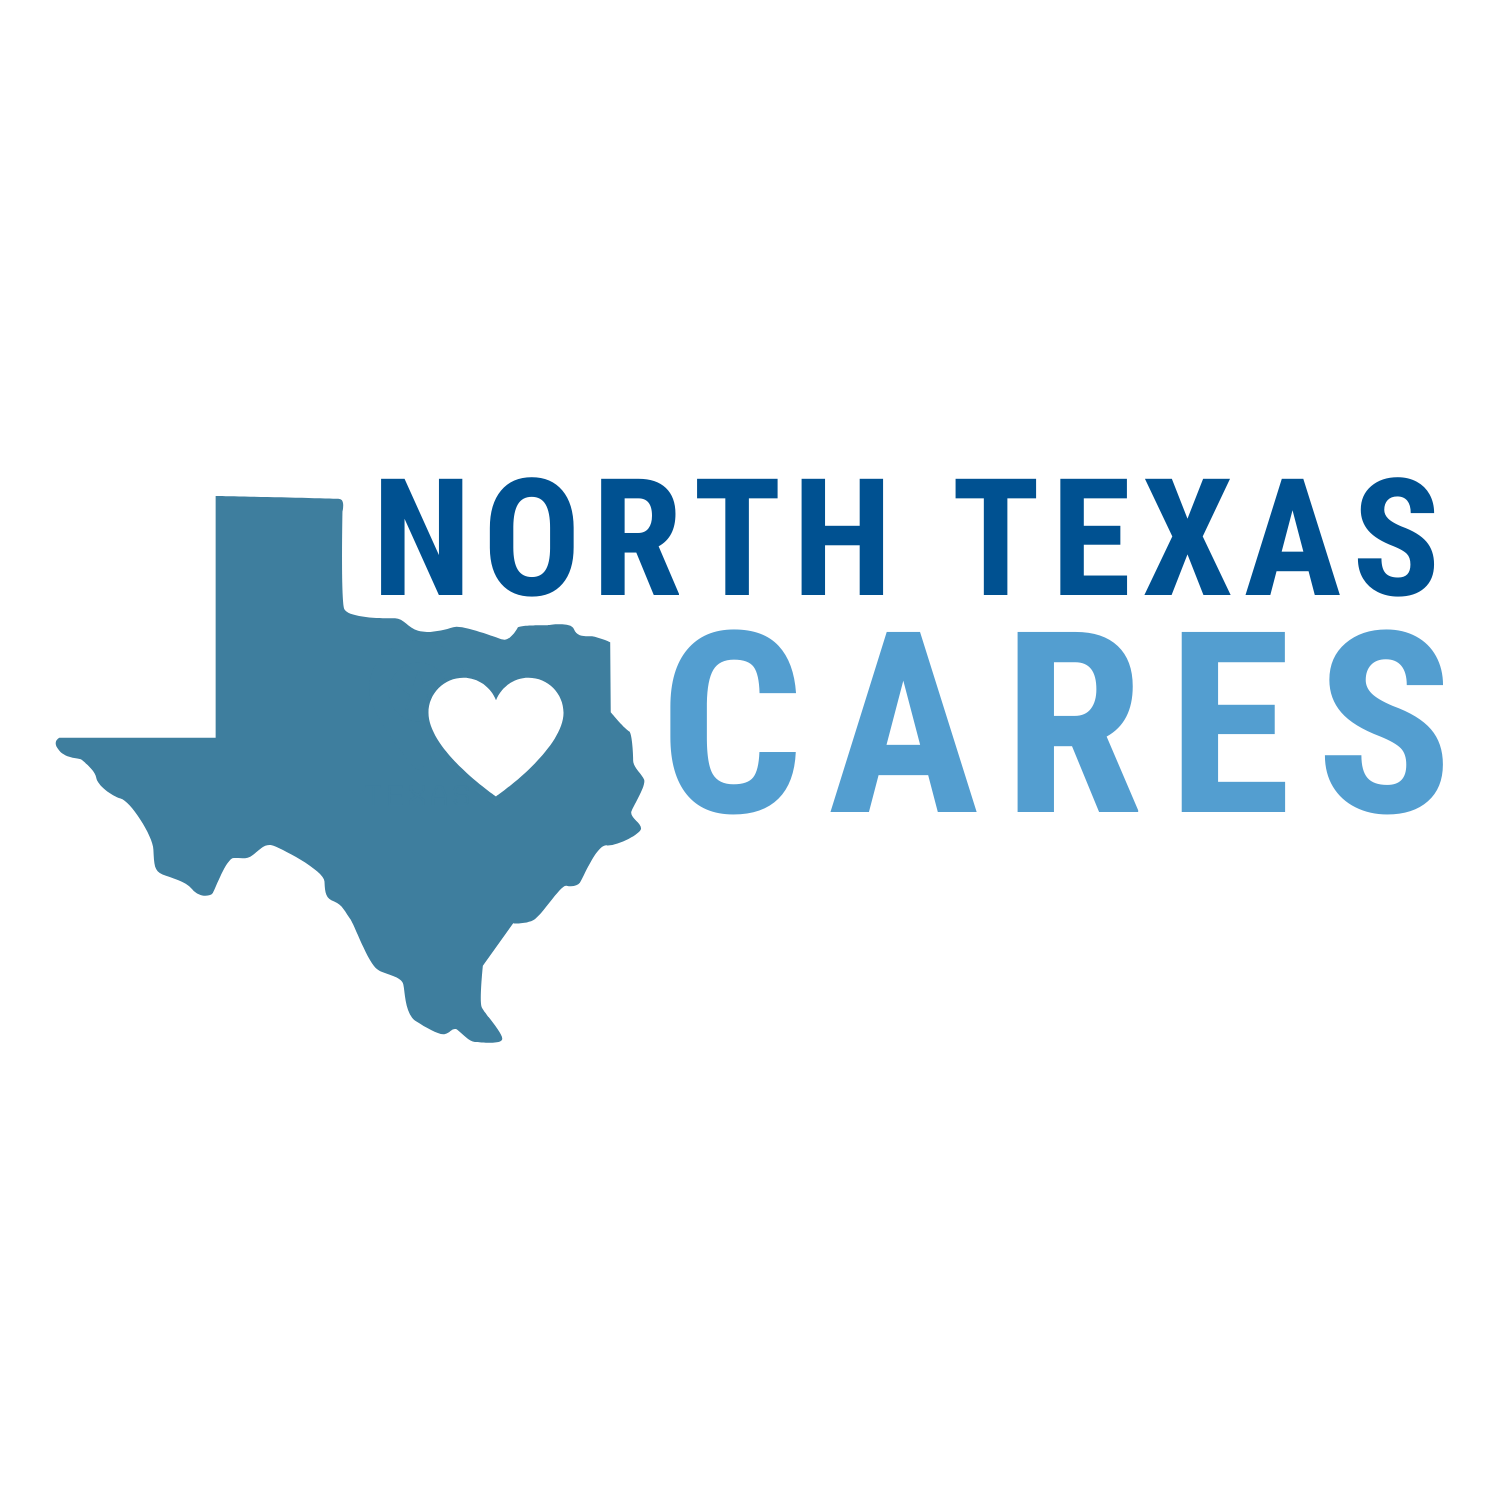 We Care. North Texas Cares.